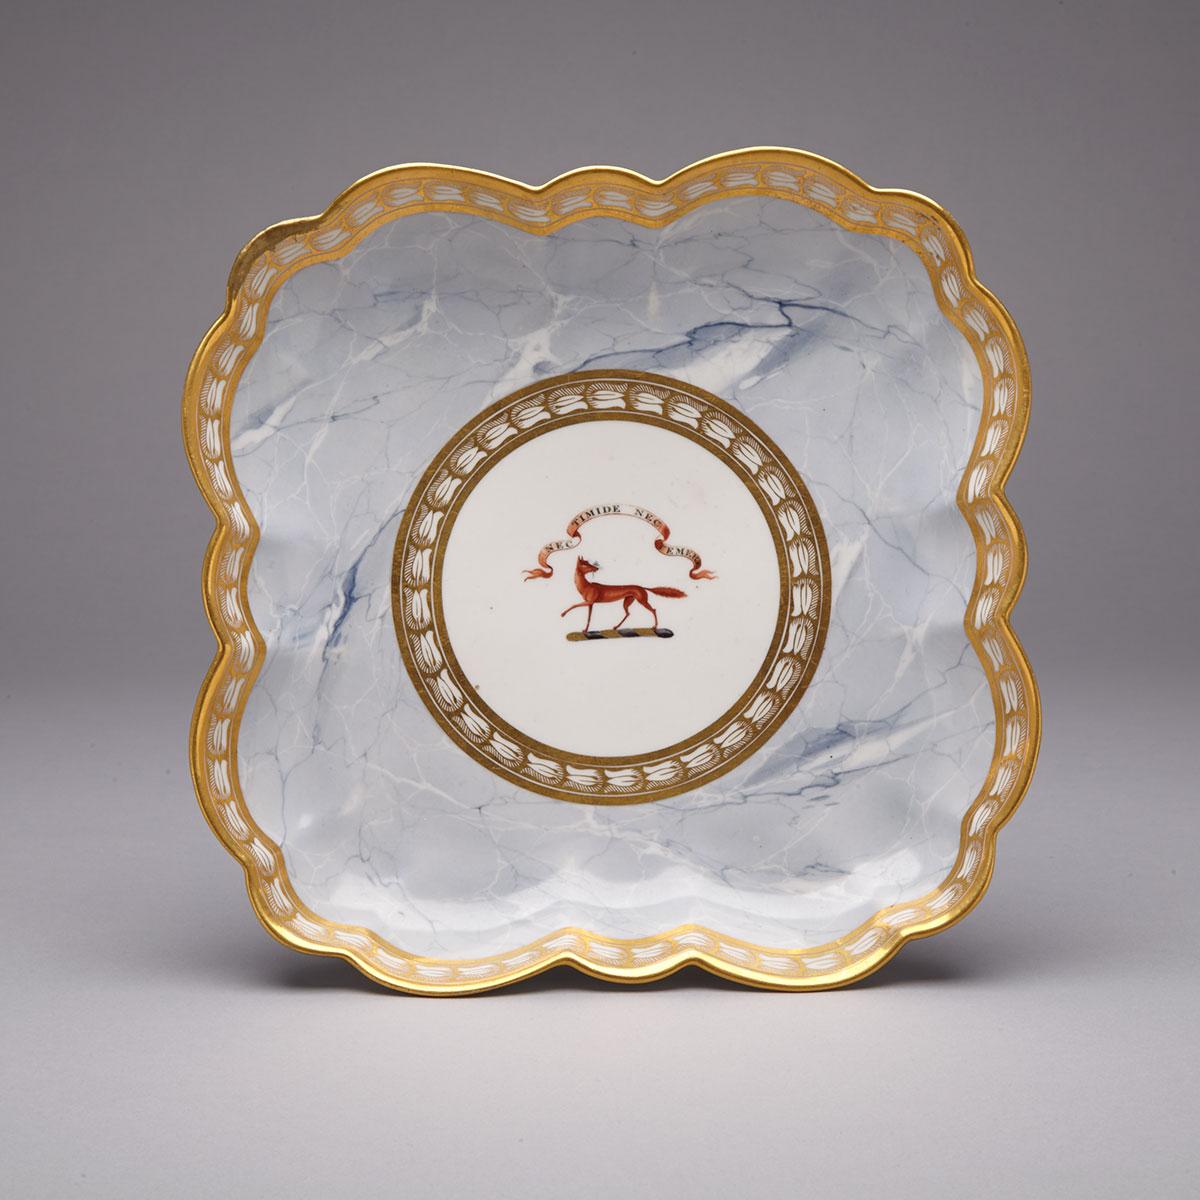 Barr, Flight & Barr Worcester Grey Marbled Ground Armorial Square Dish, c.1804-13